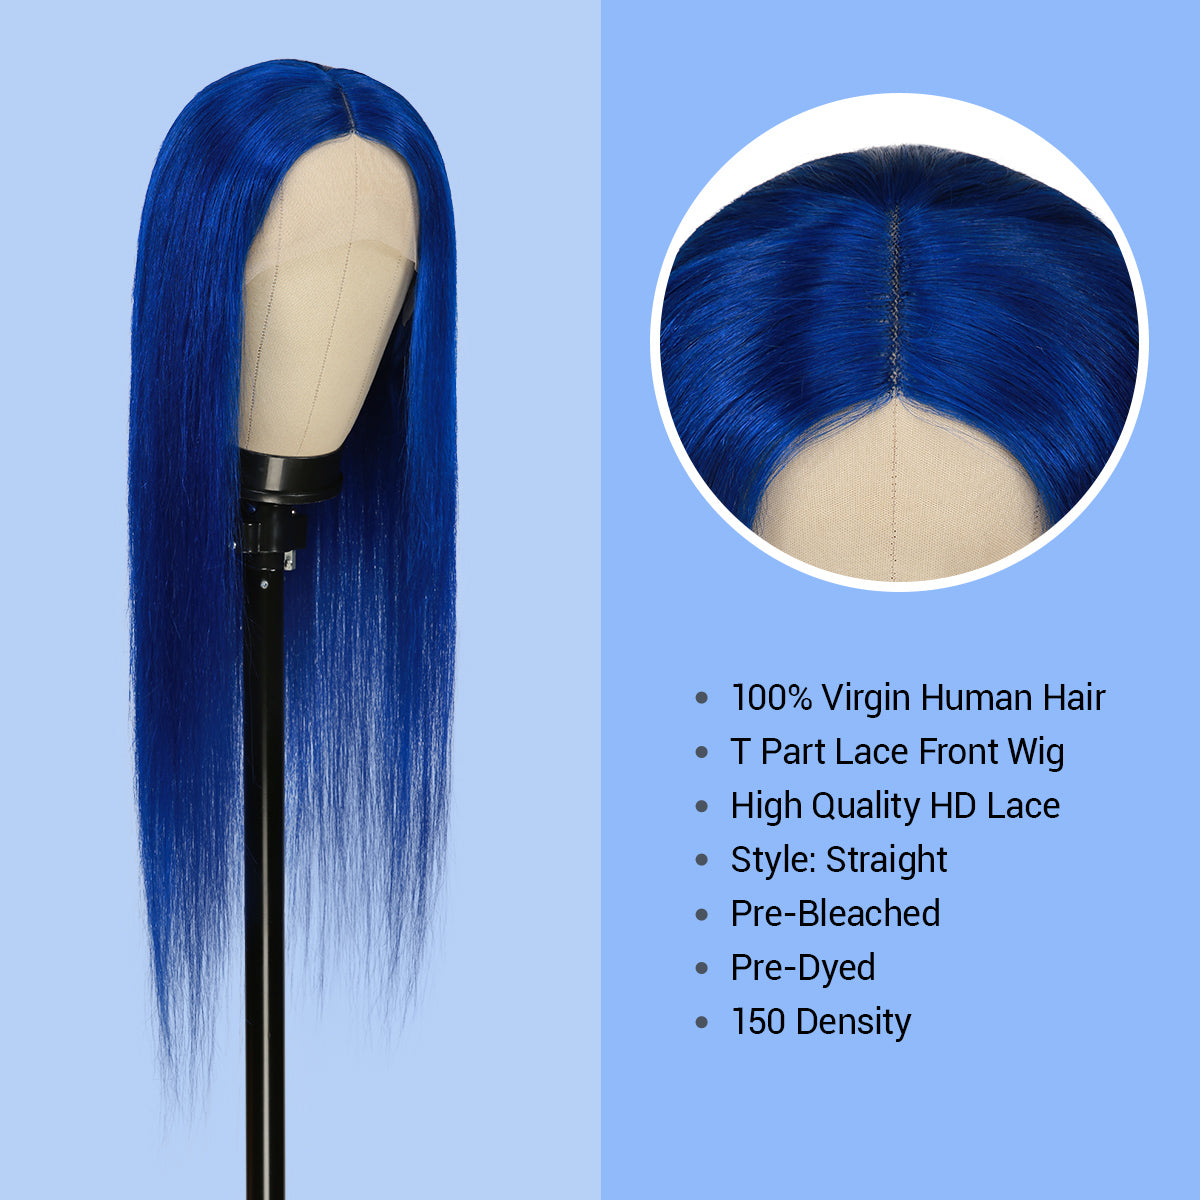 Human Hair, Lace Wig, T part, Deep part, Center Part, Middle Part, Long and Full, Natural Hairline, Straight, layered straight, HD Lace, Blonde, 613, Fancy Color, Blue, Pre dyed, 100% Virgin Human Hair, High Quality HD Lace, Pre bleached, 150% density